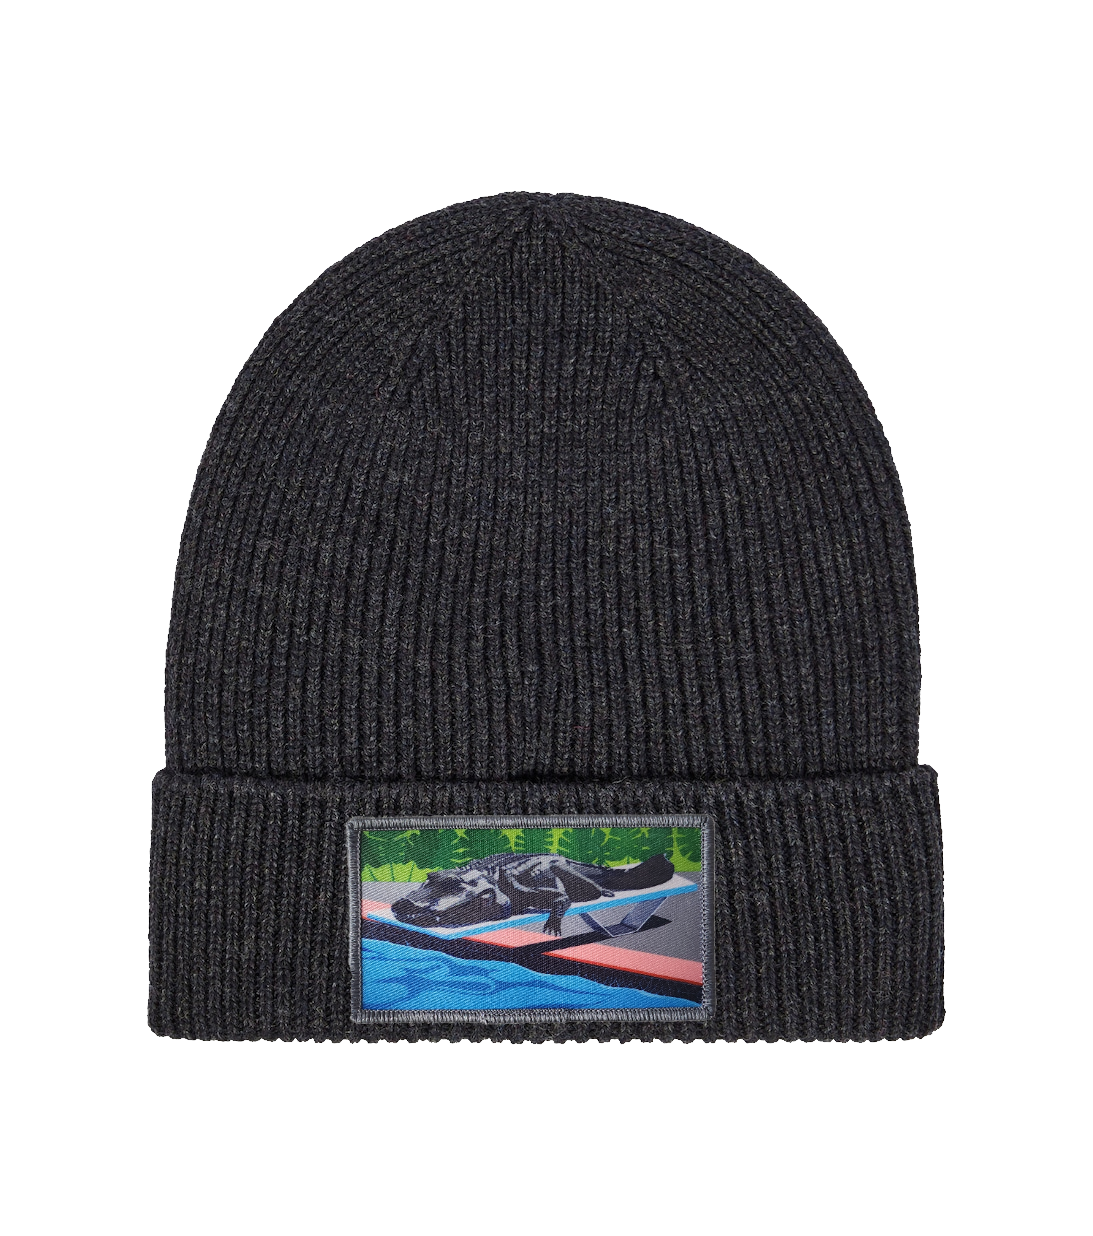 Merino Wool Beanie Charcoal Hats FlynHats Pool Party Canceled  